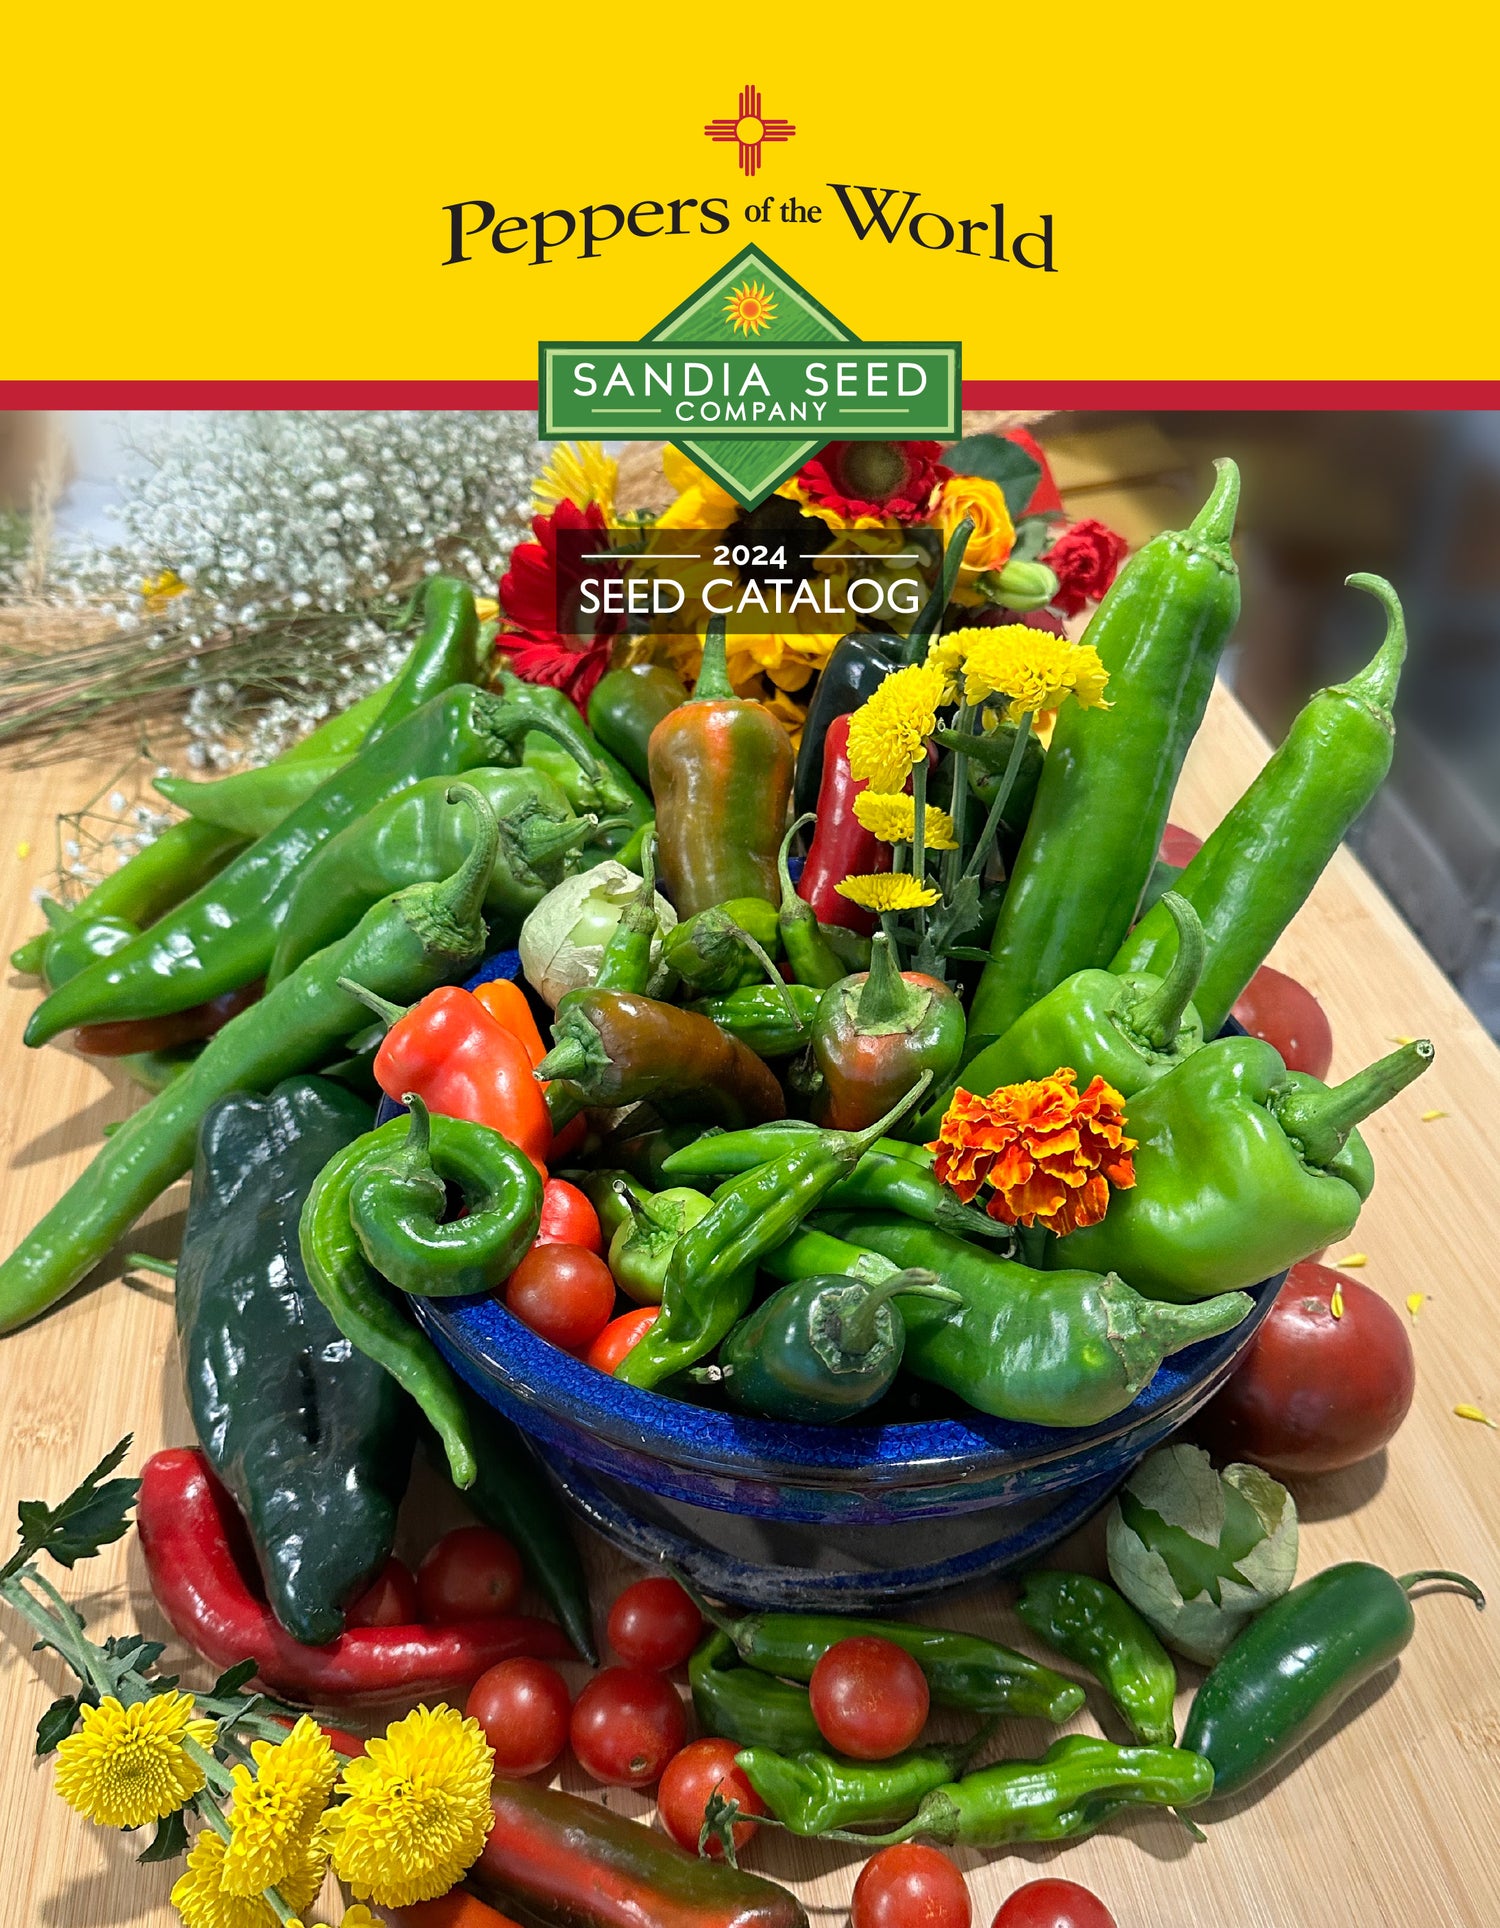 2024 Seed Catalog with Peppers of the World from Sandia Seed